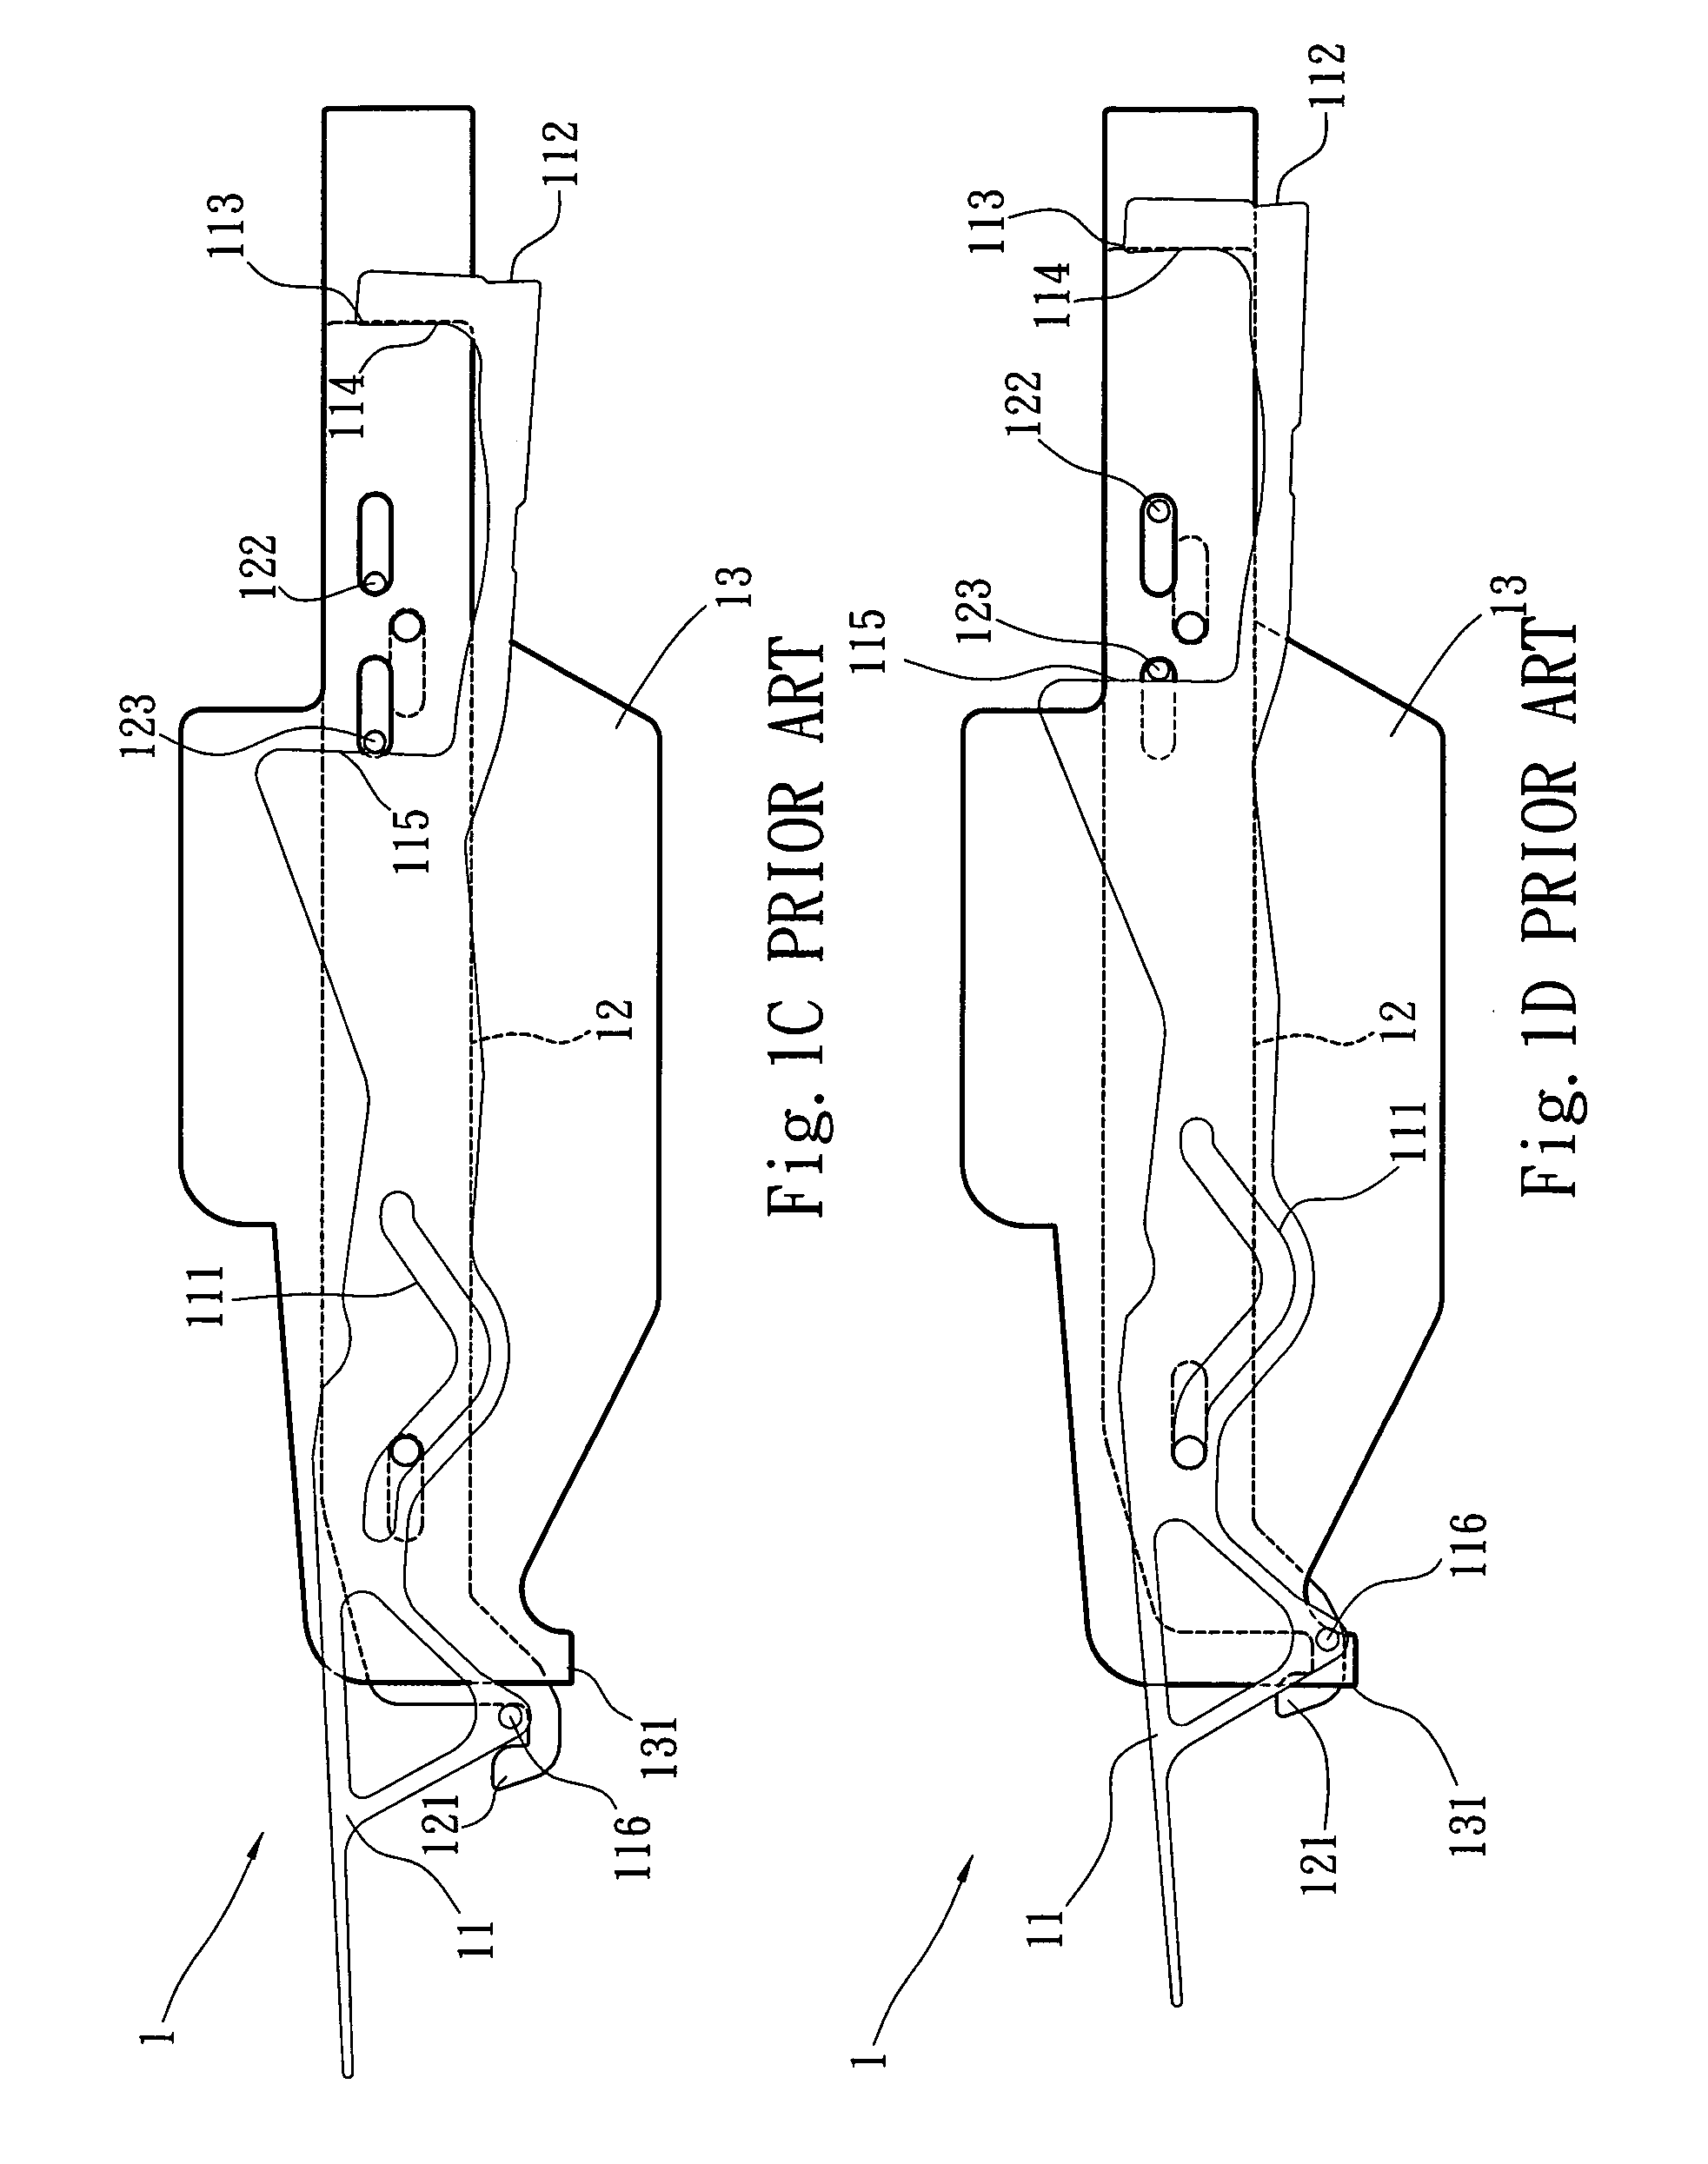 High speed color altering head for single-face circular knitting machines